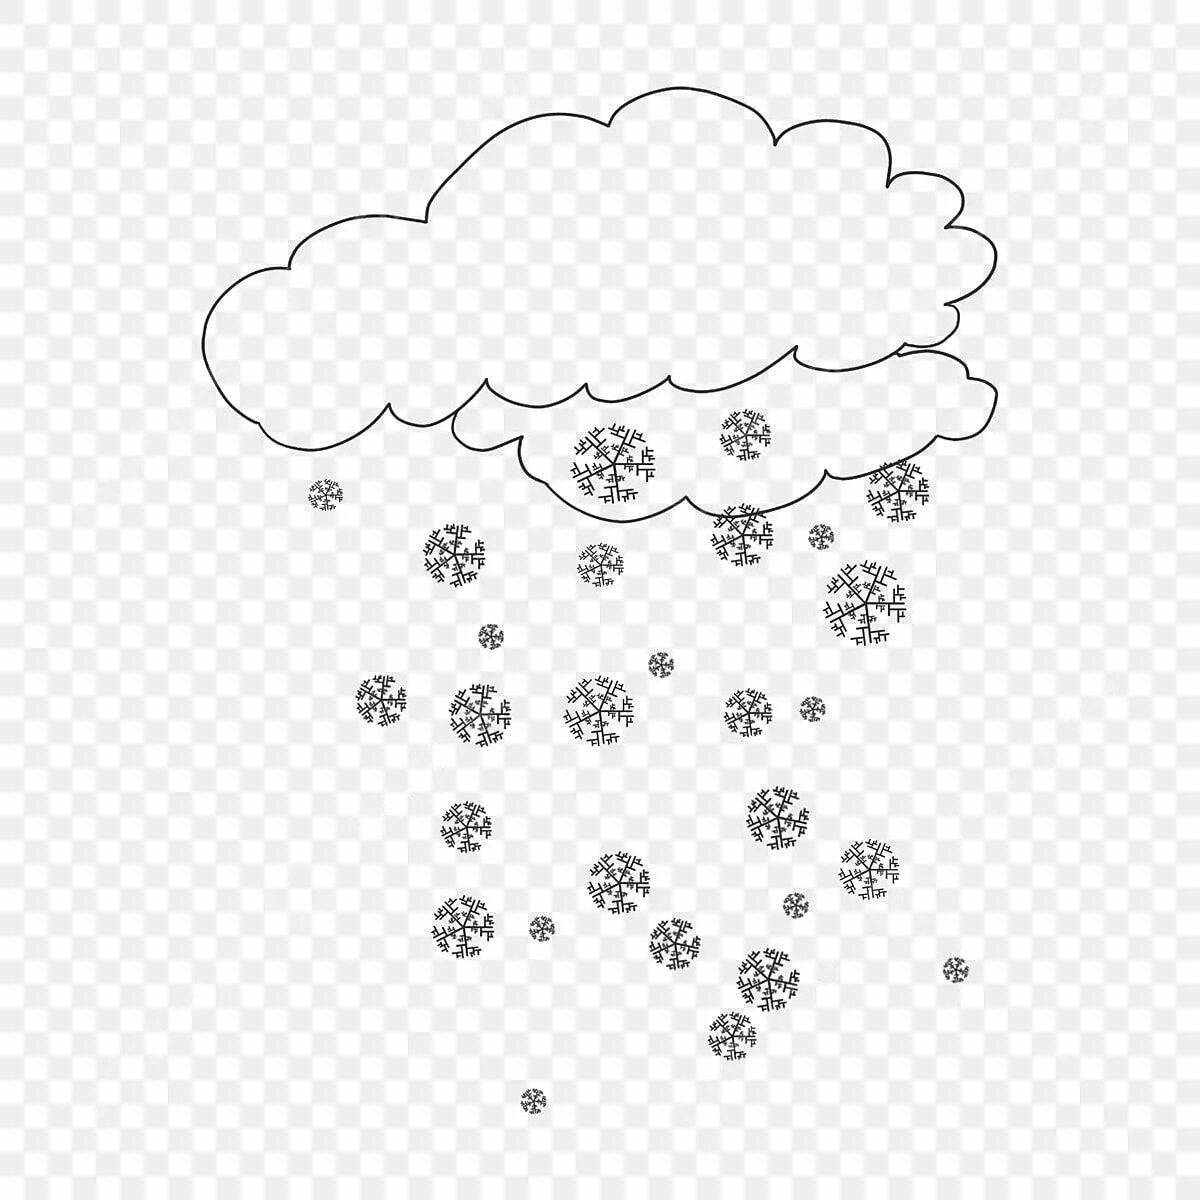 Tempting it's snowing coloring pages for kids